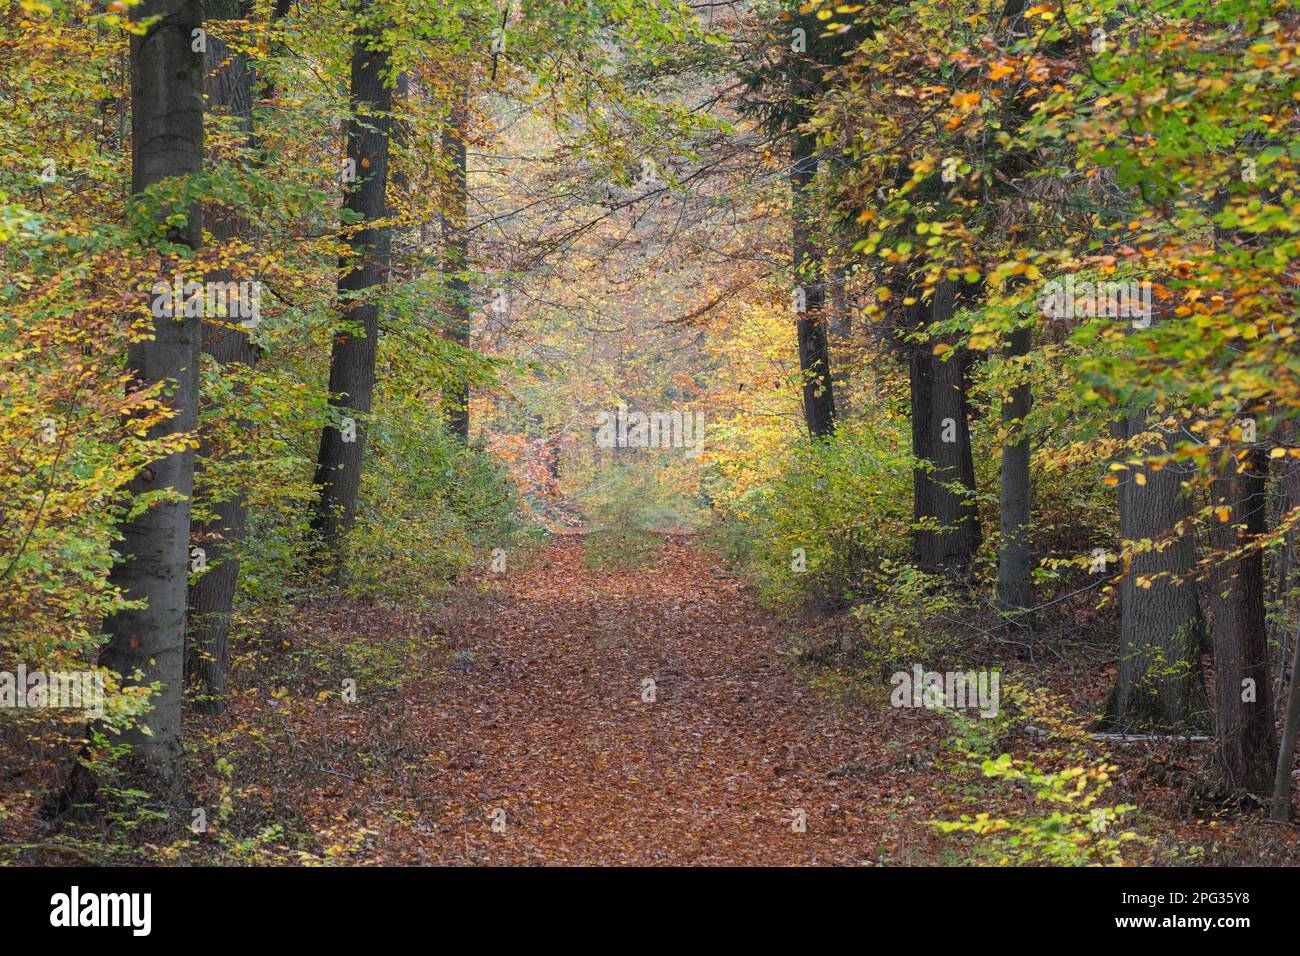 Common Beech (Fagus sylvatica). Forest in autumn. Schleswig-Holstein, Germany Stock Photo